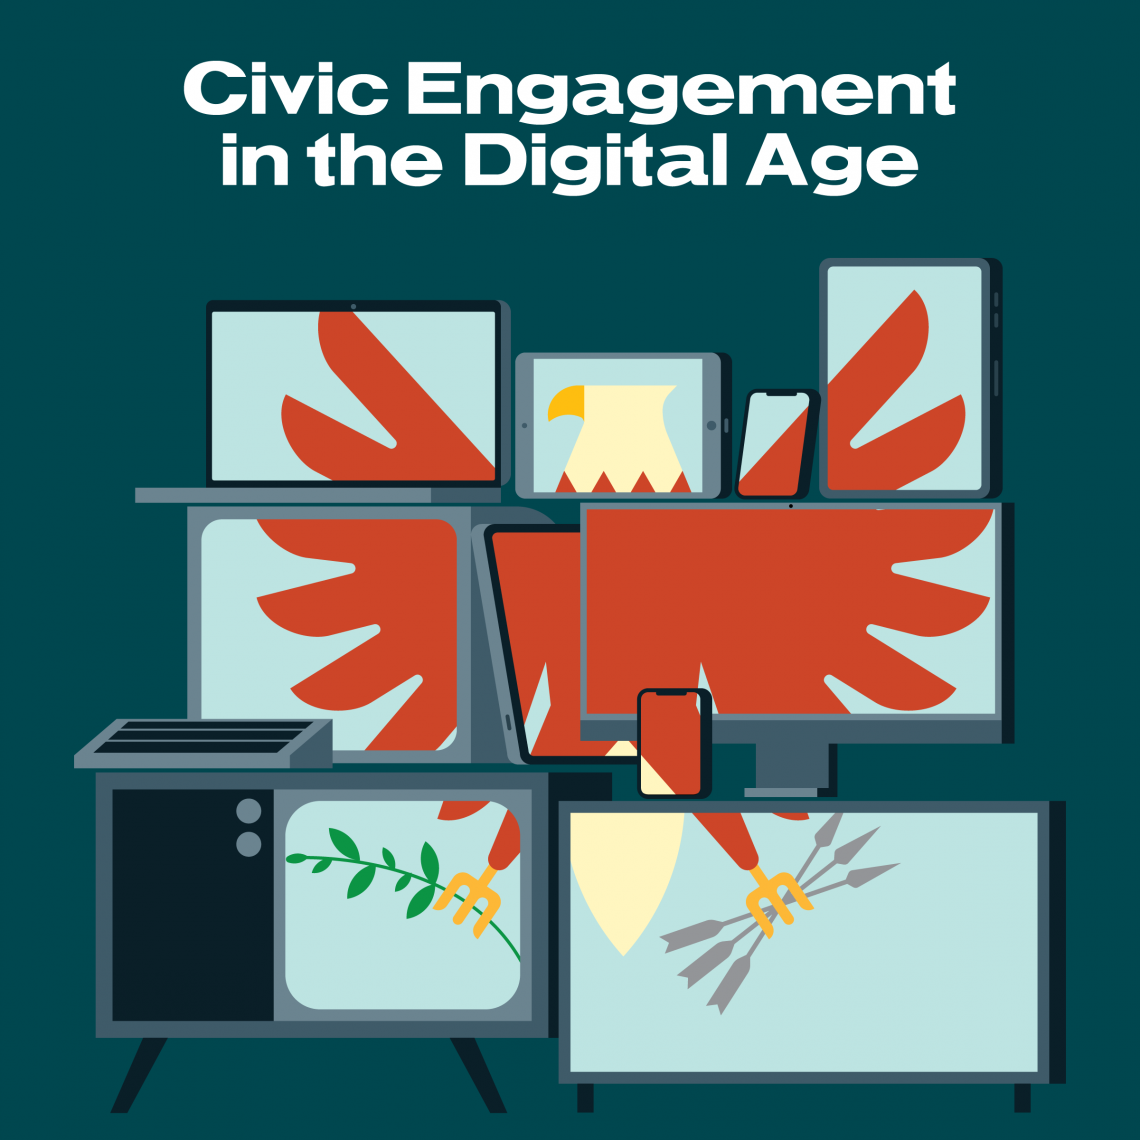 Civic Engagement in the Digital Age